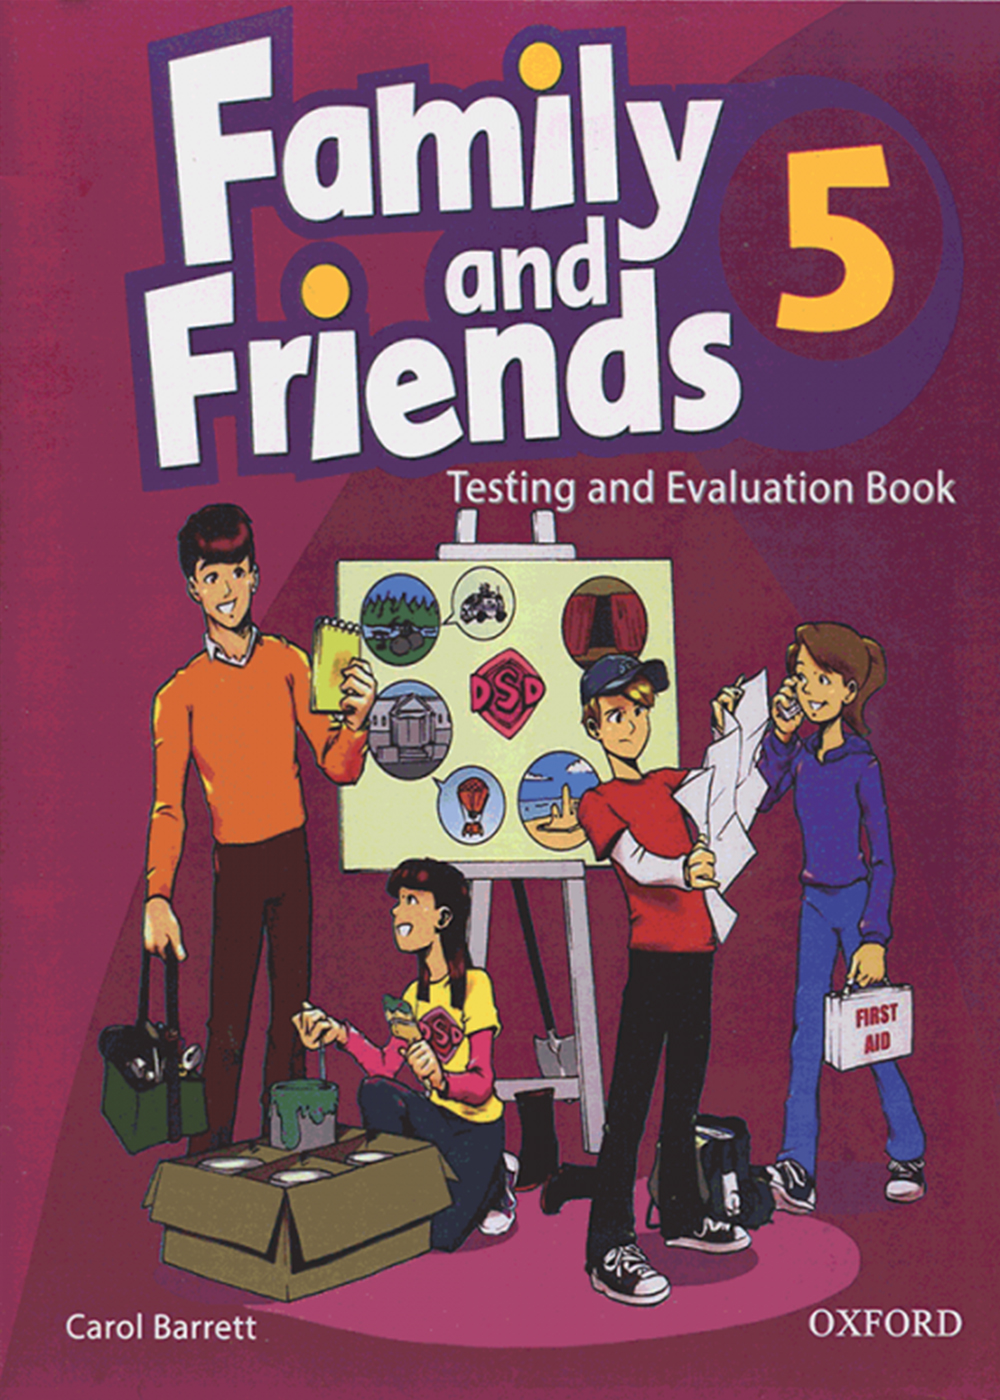 Friends 3 test book. Family and friends 5 Testing and evaluation book. Фэмили френдс 5. Family and friends 5 Workbook. Oxford Family and friends 5 класс.